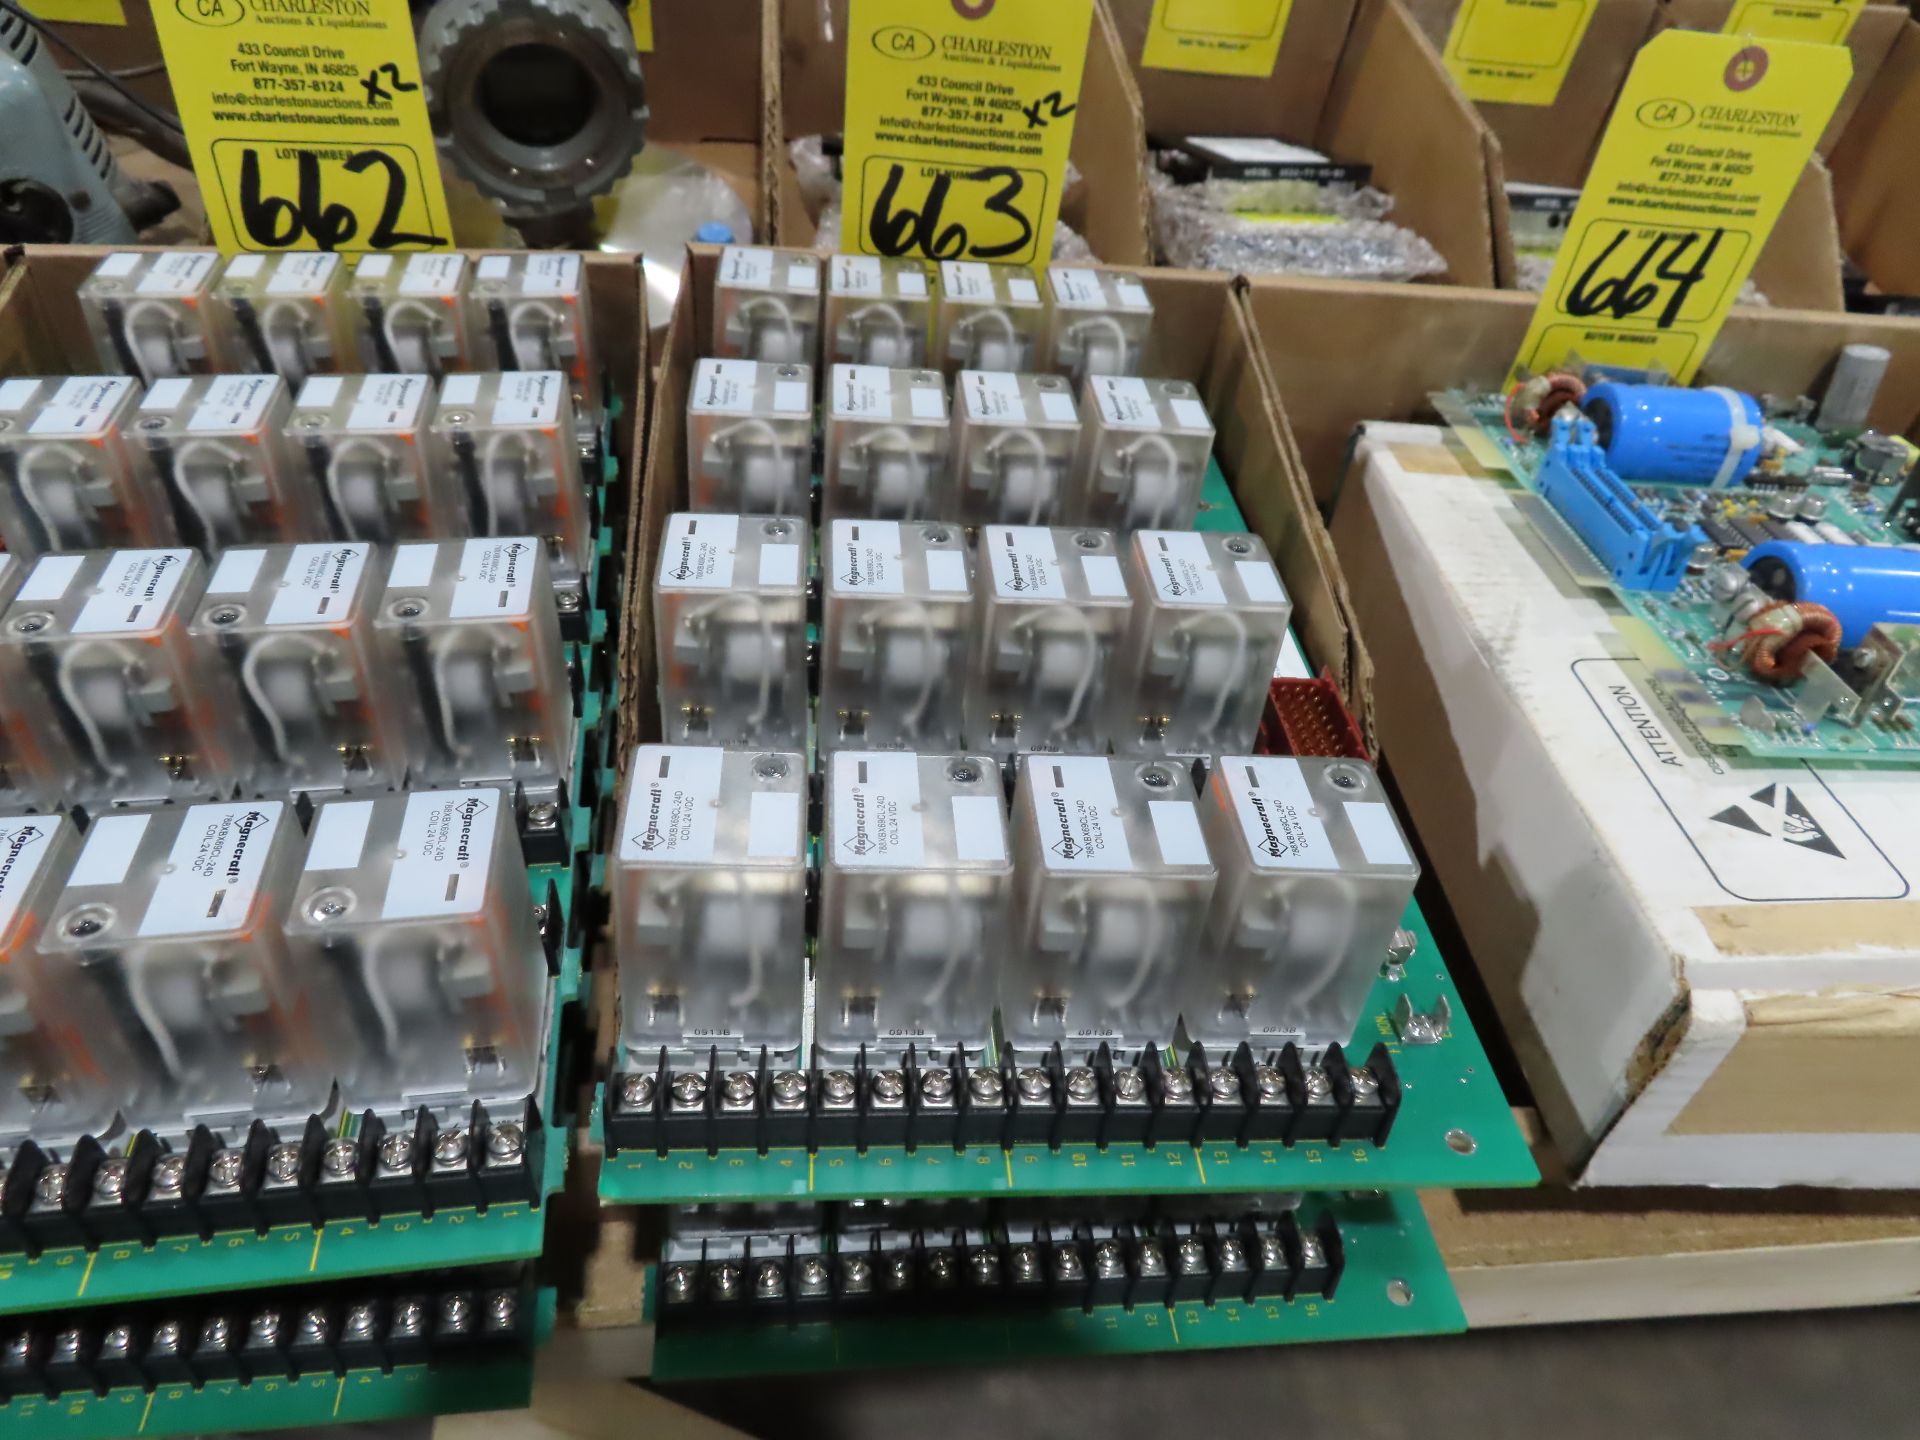 Qty 2 ABB model 6642016D2 relay panel, as always, with Brolyn LLC auctions, all lots can be picked